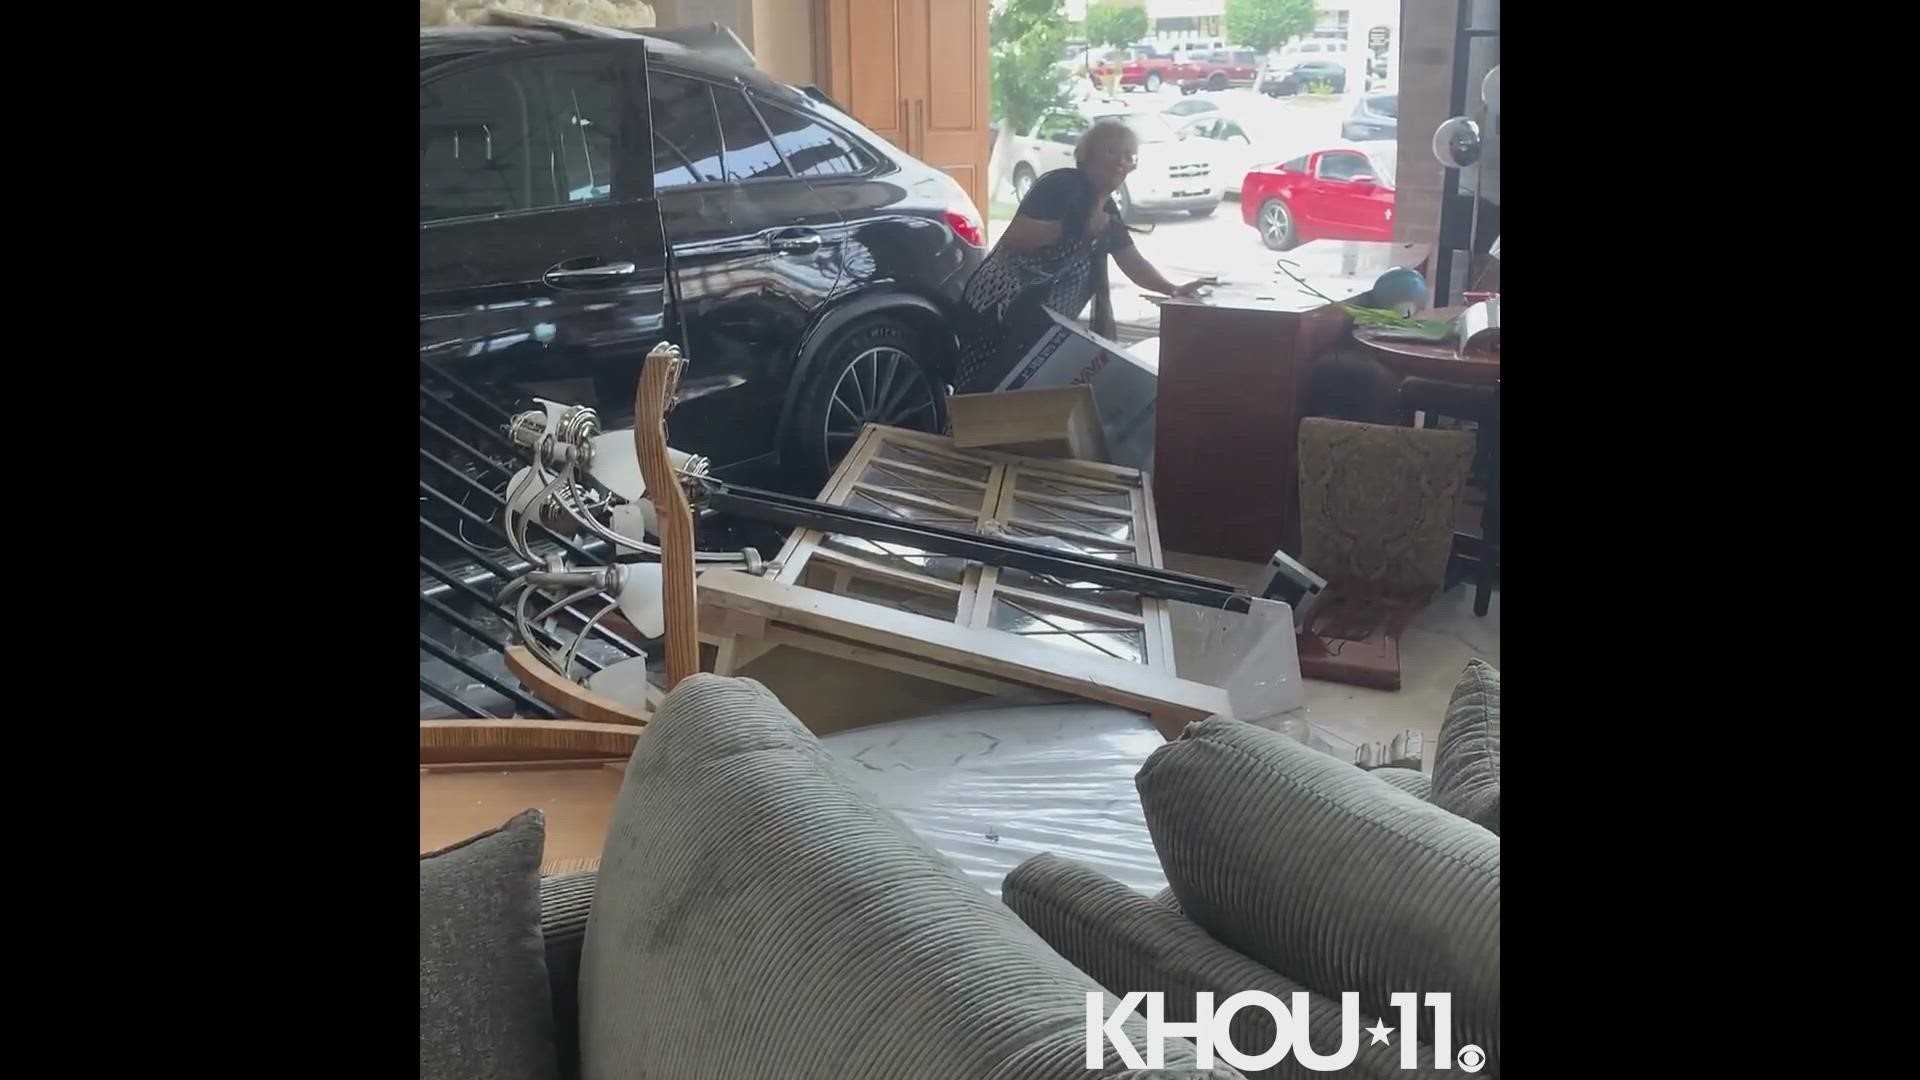 A car plowed into a southwest Houston furniture store on Friday, July 1. Fortunately, no one was hurt.